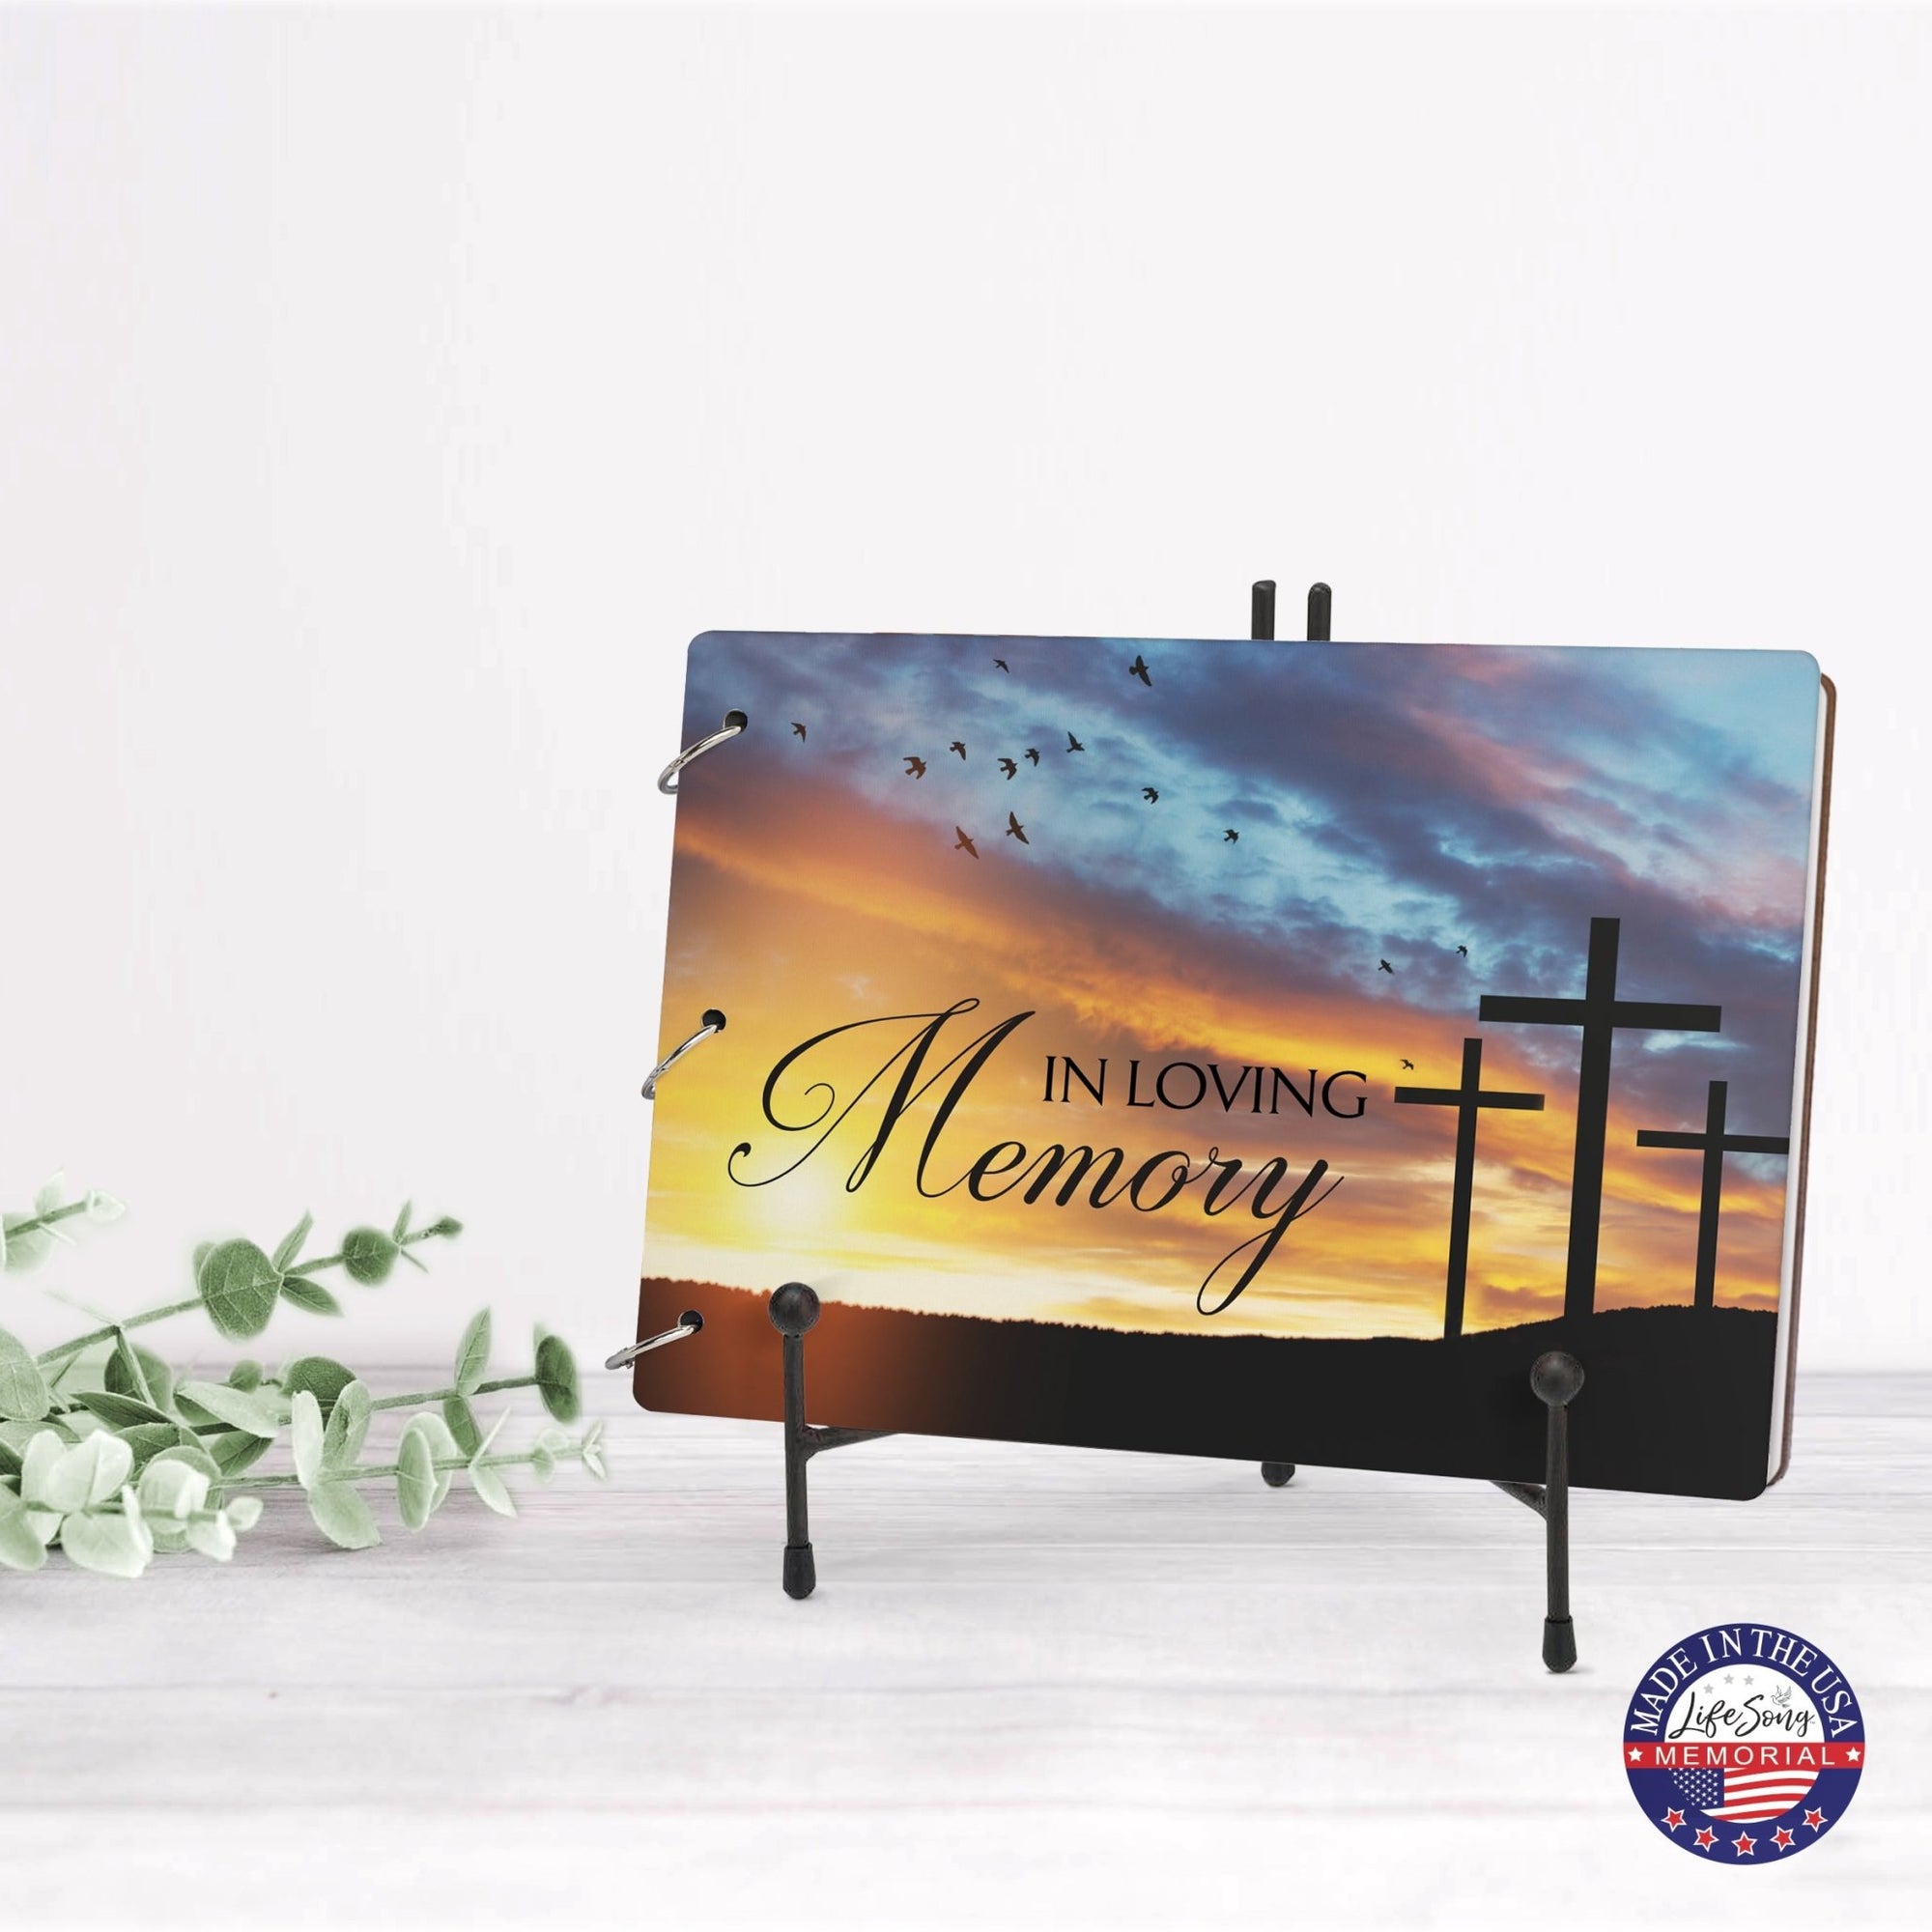 Celebration Of Life Funeral Guest Books For Memorial Services Registry With Wooden Cover - In Loving Memory - LifeSong Milestones